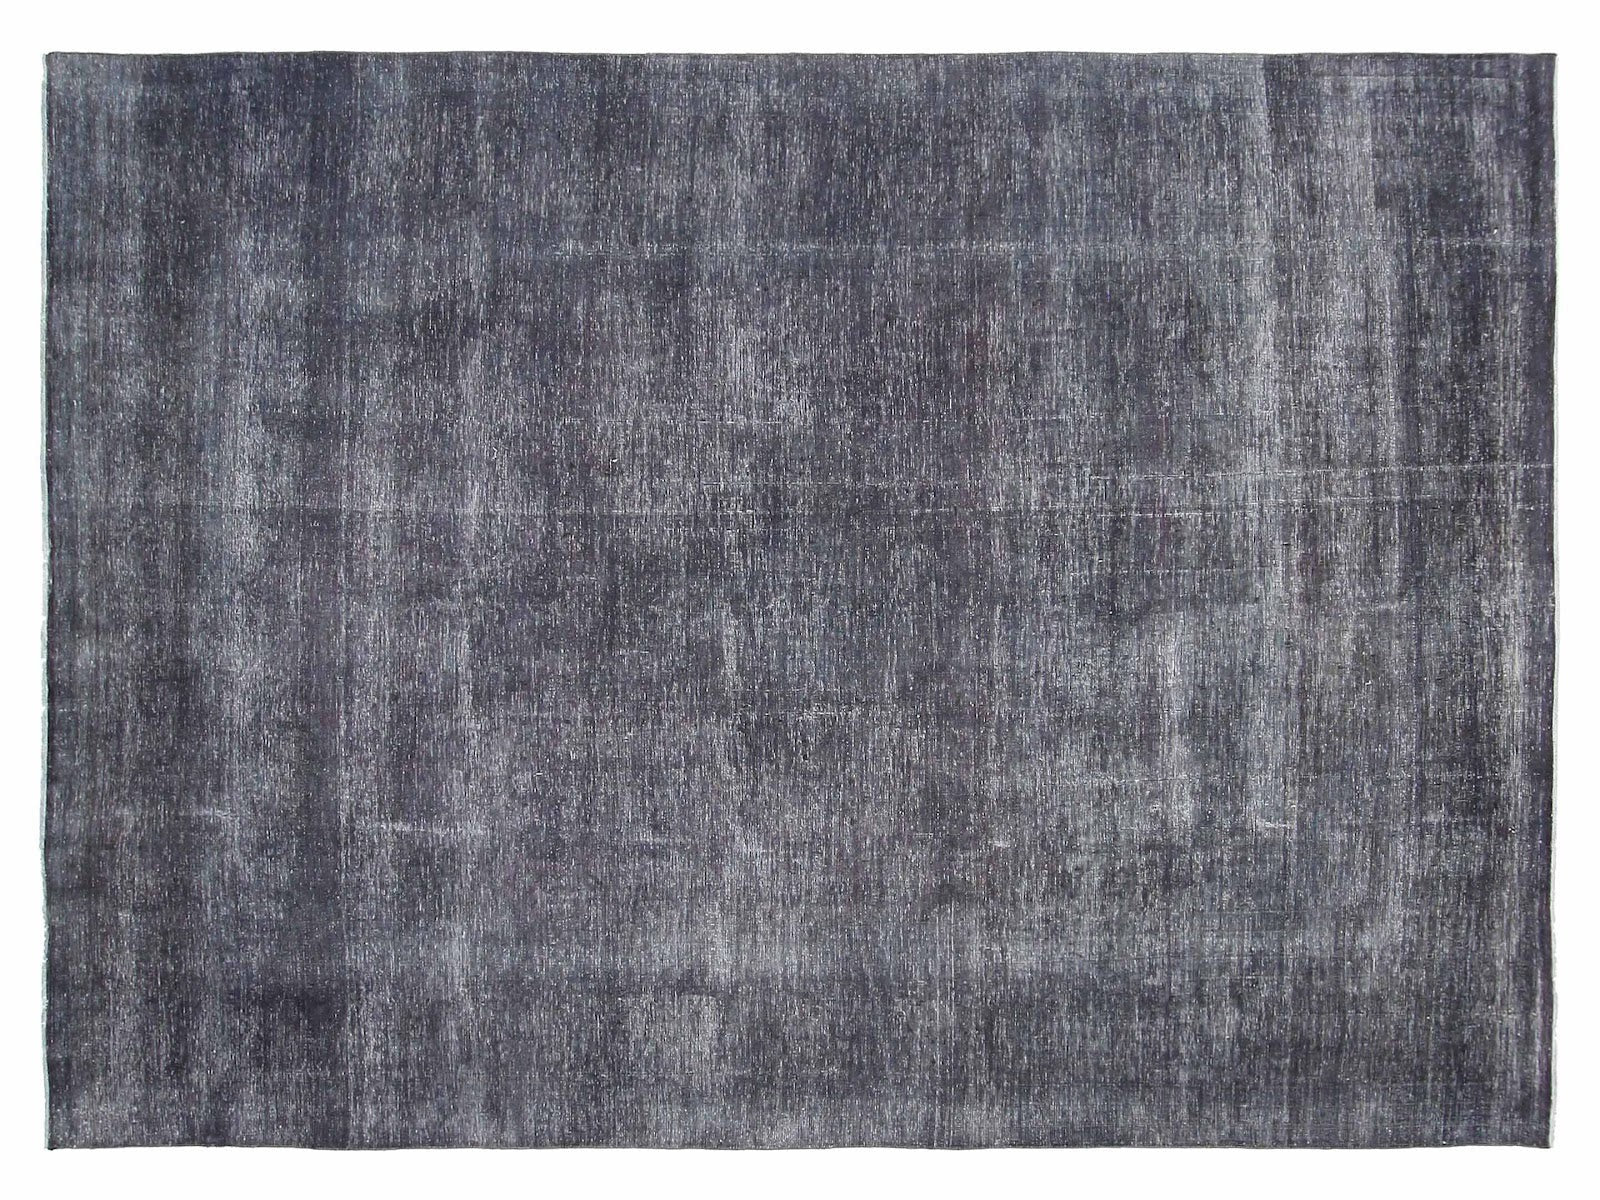 8x10 transitional rug in a faded black color, hand-knotted in Pakistan from 100% wool.